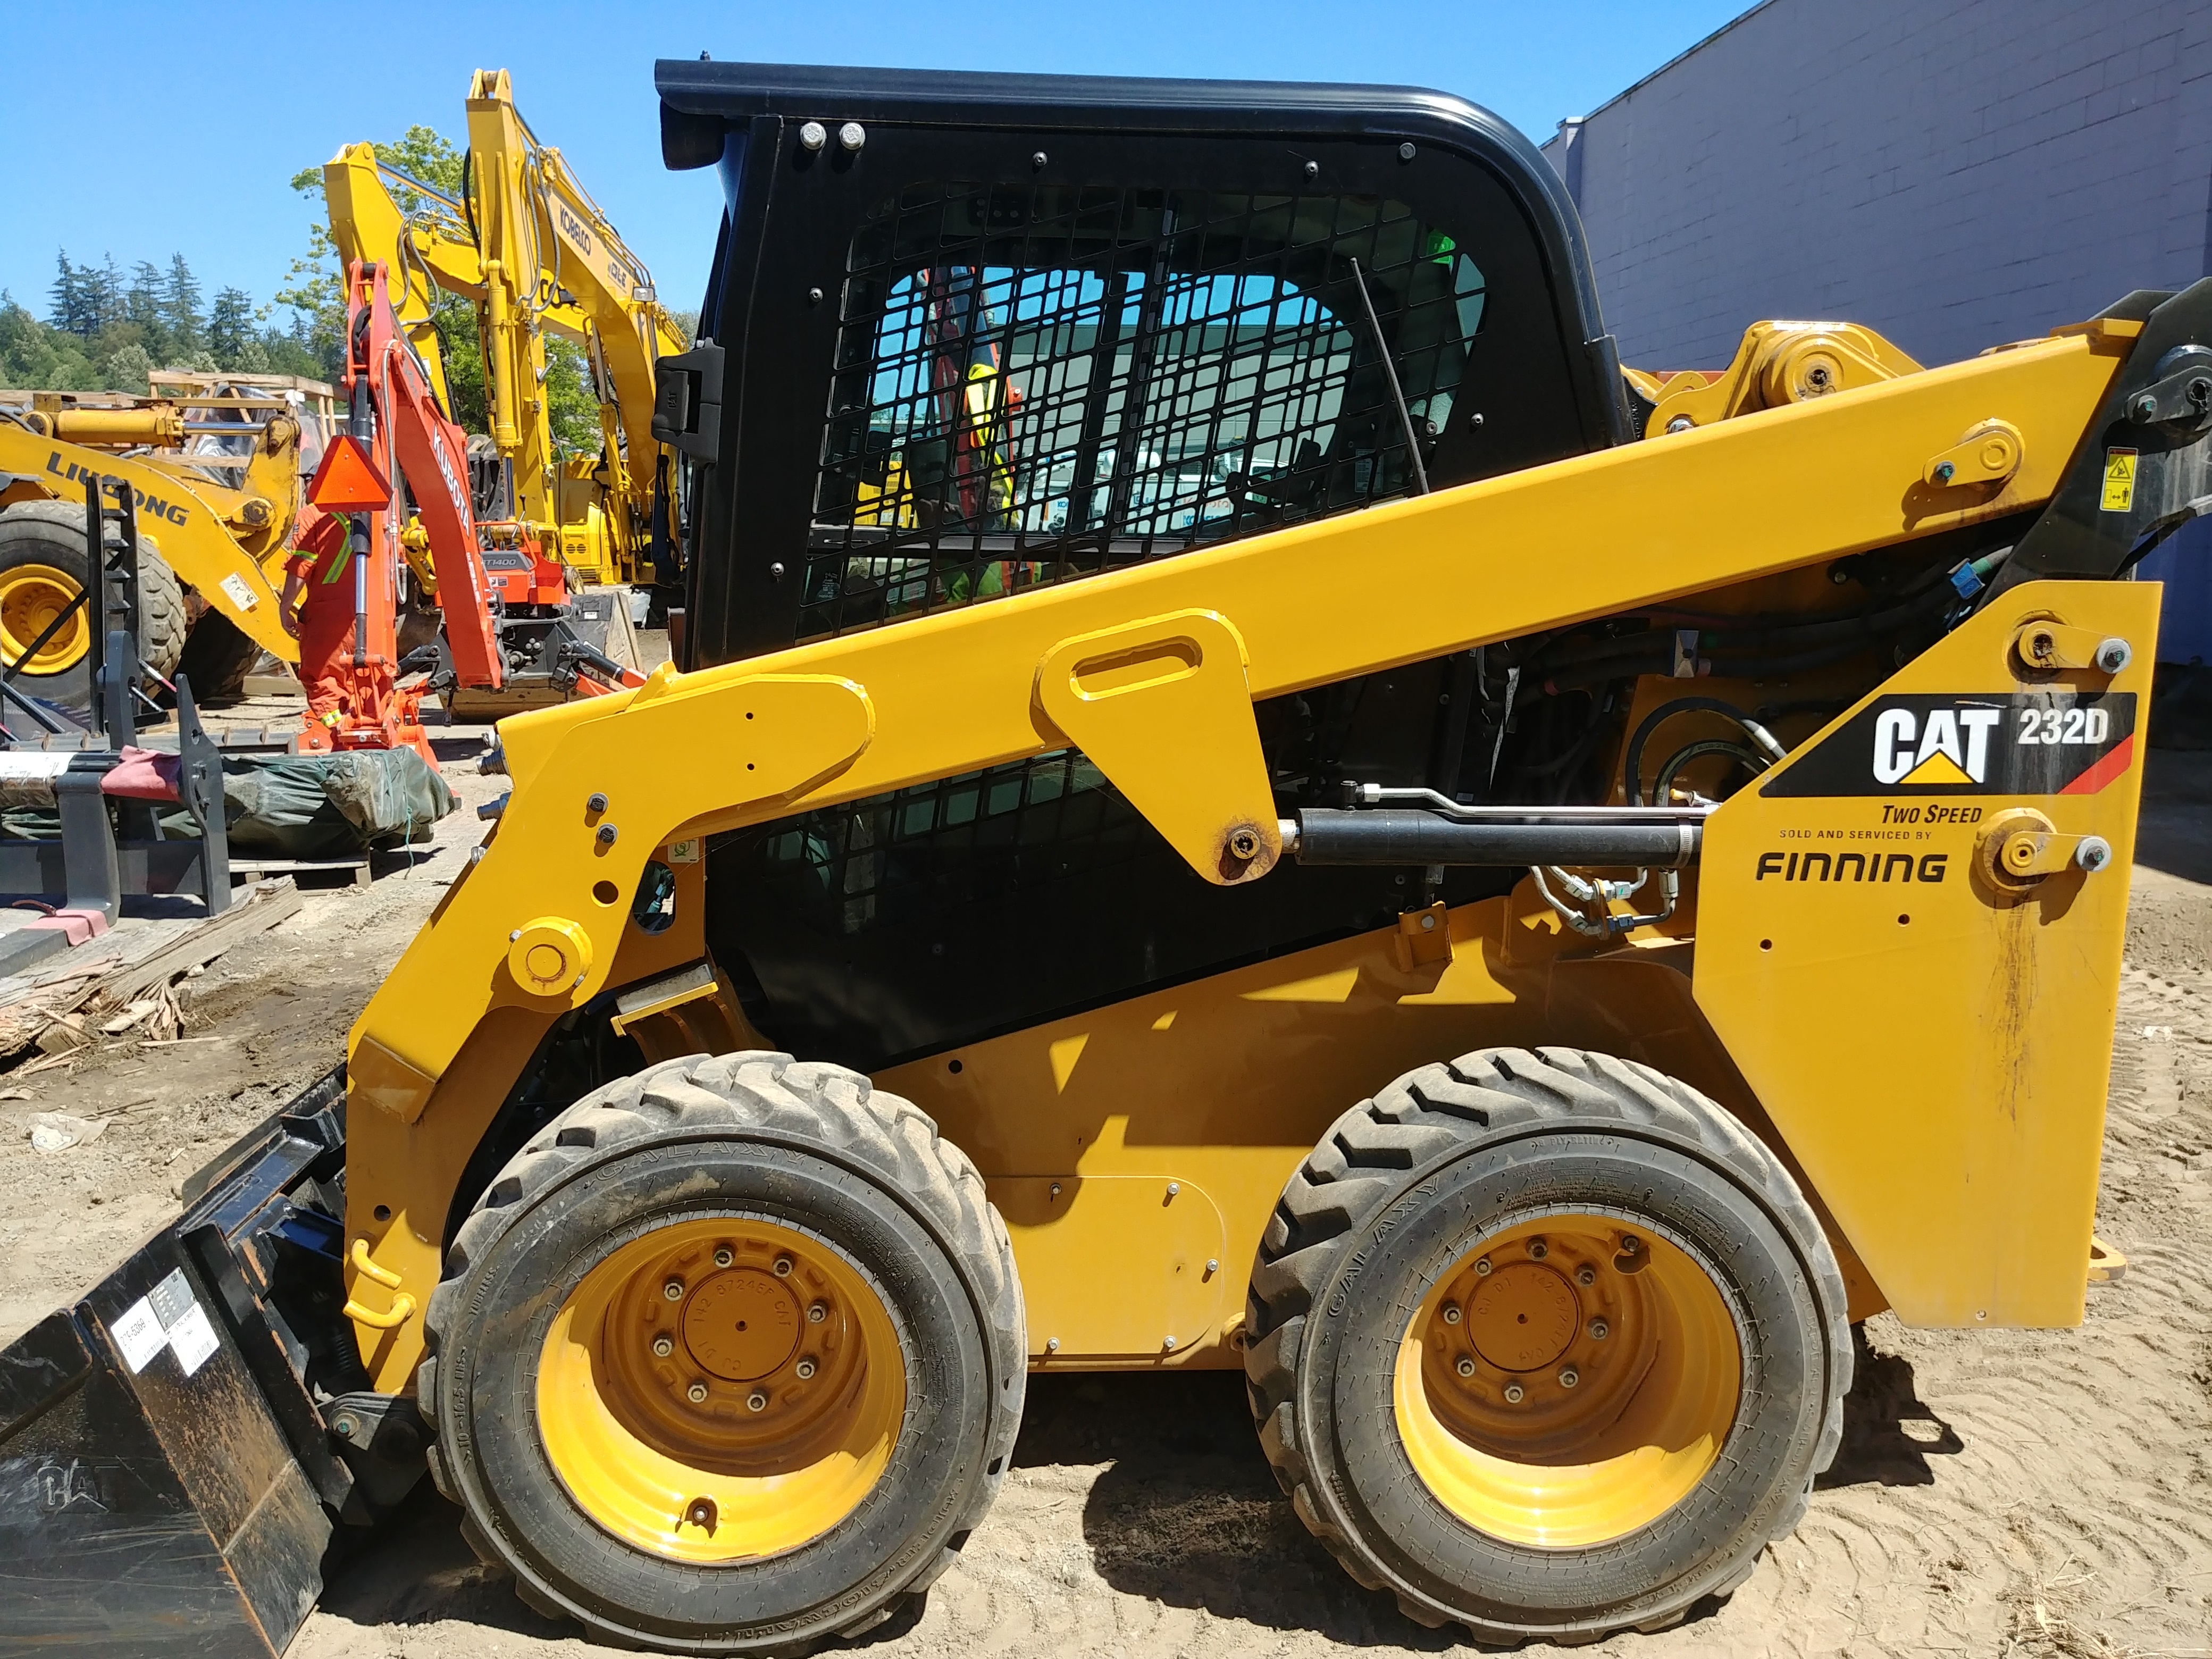 2015 Caterpillar 232D Skid Steer Loader for sale in Surrey, BC IronSearch